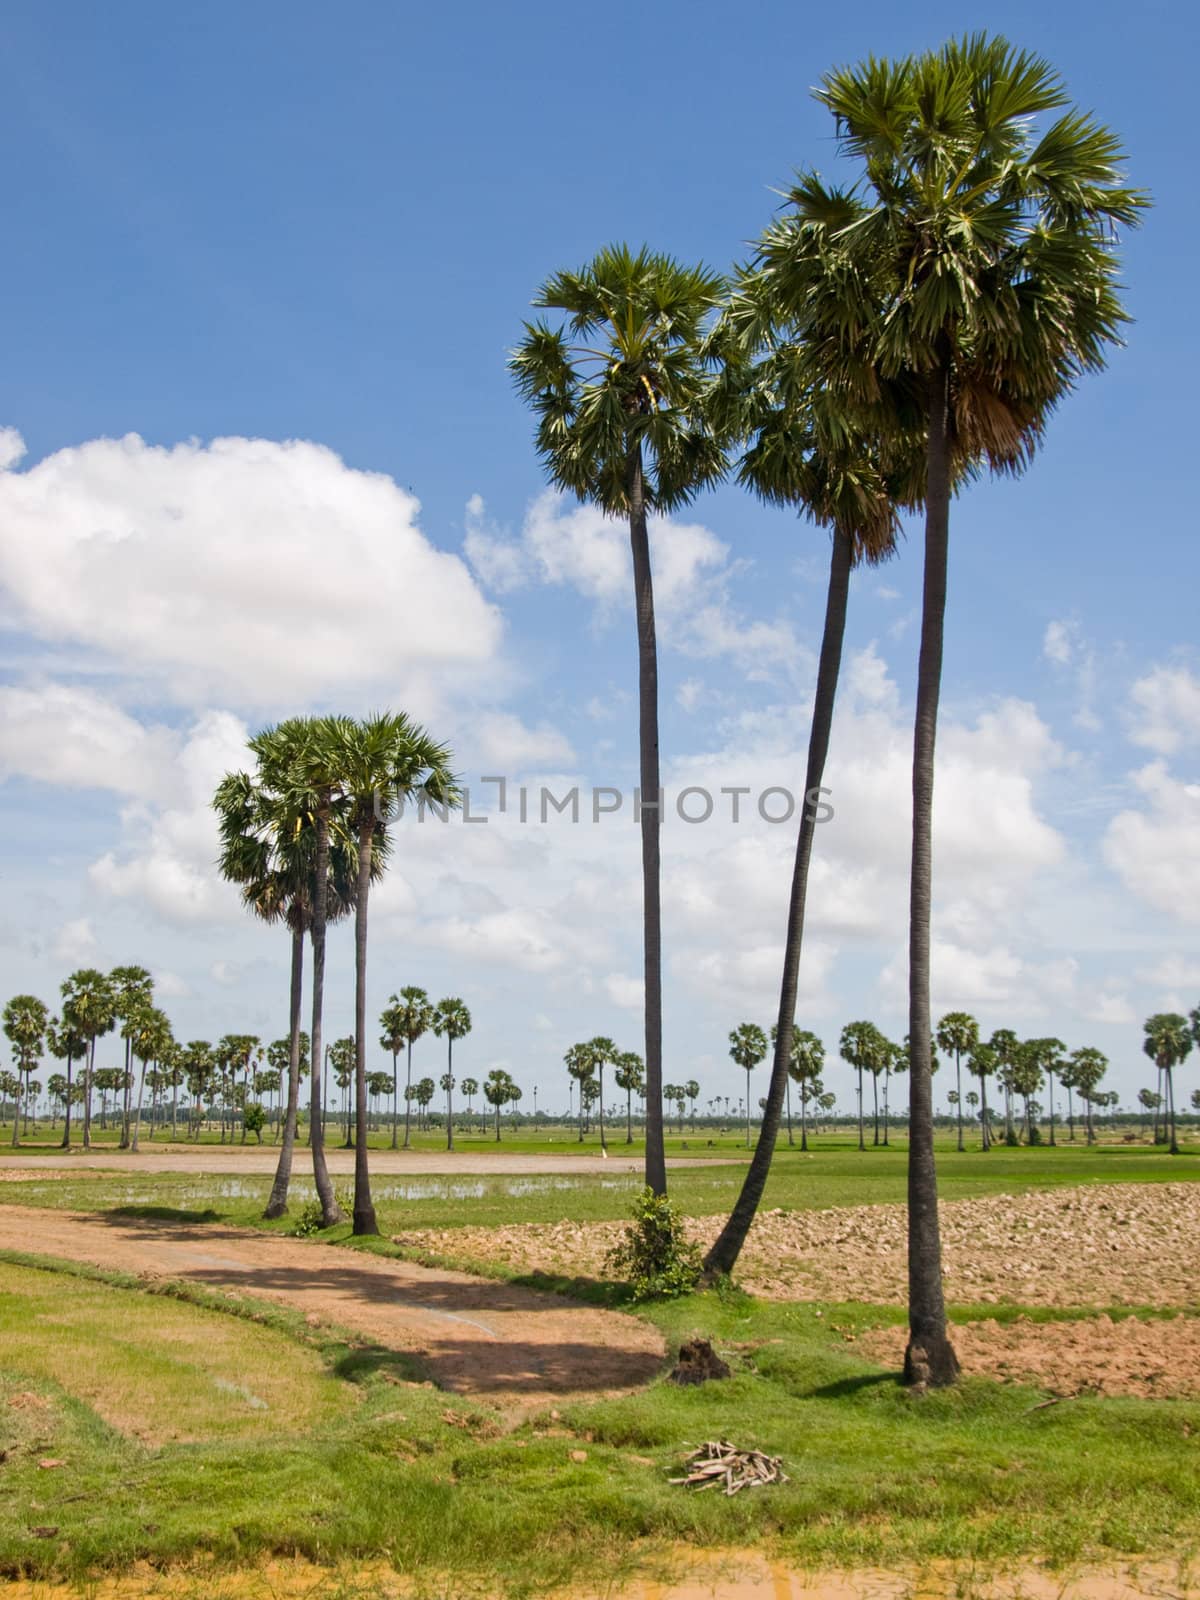 cambodian palms by dyvan